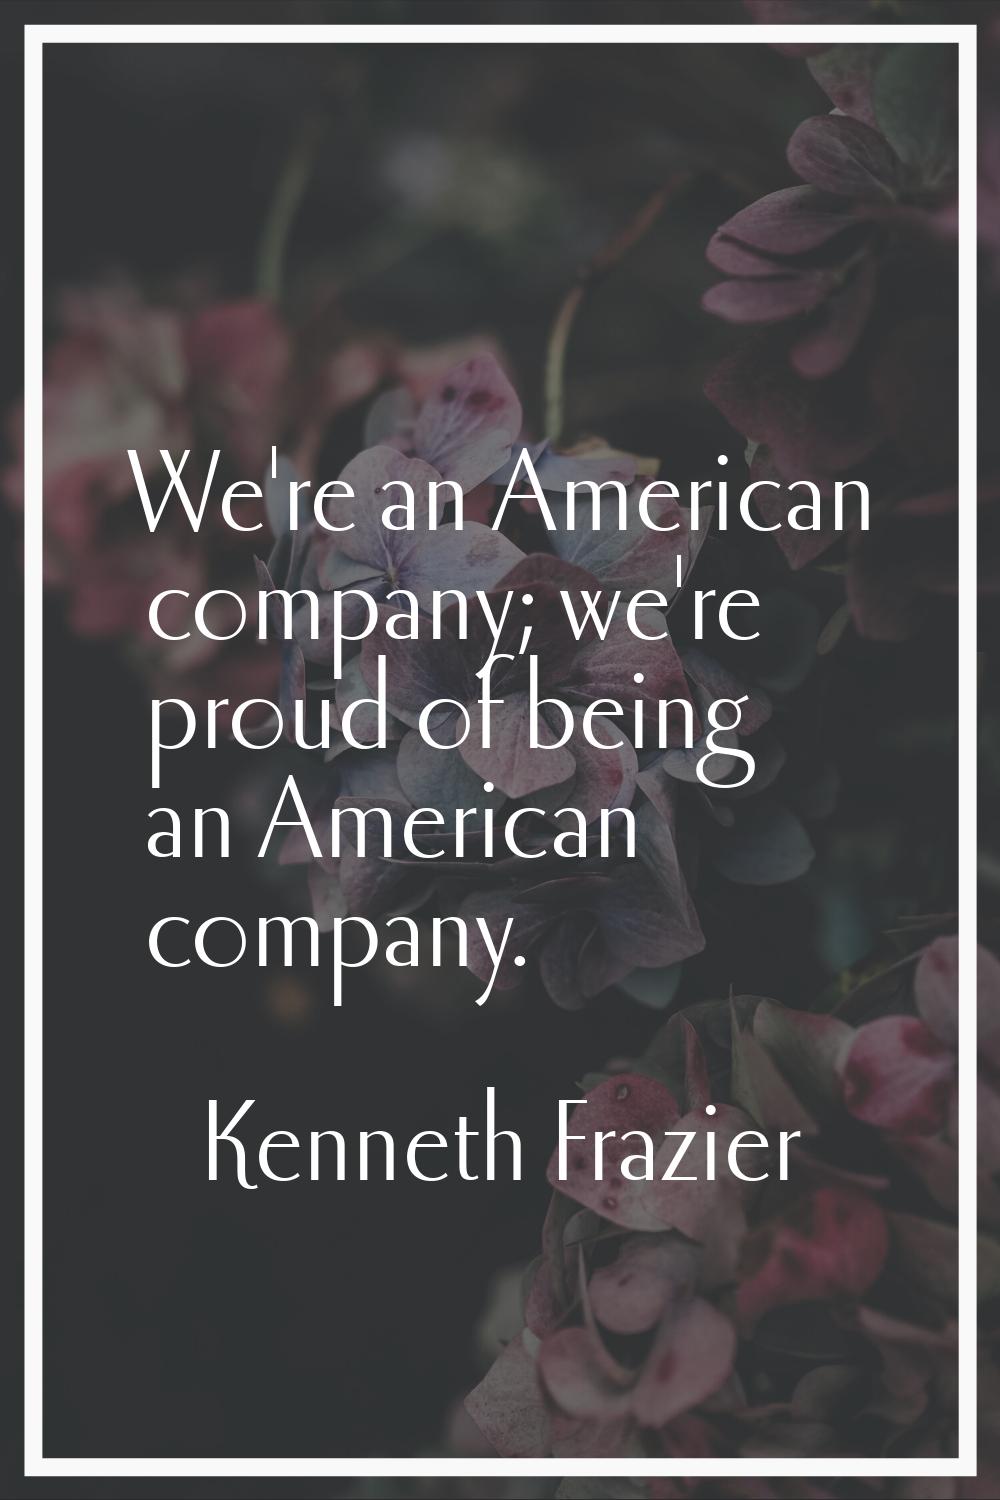 We're an American company; we're proud of being an American company.